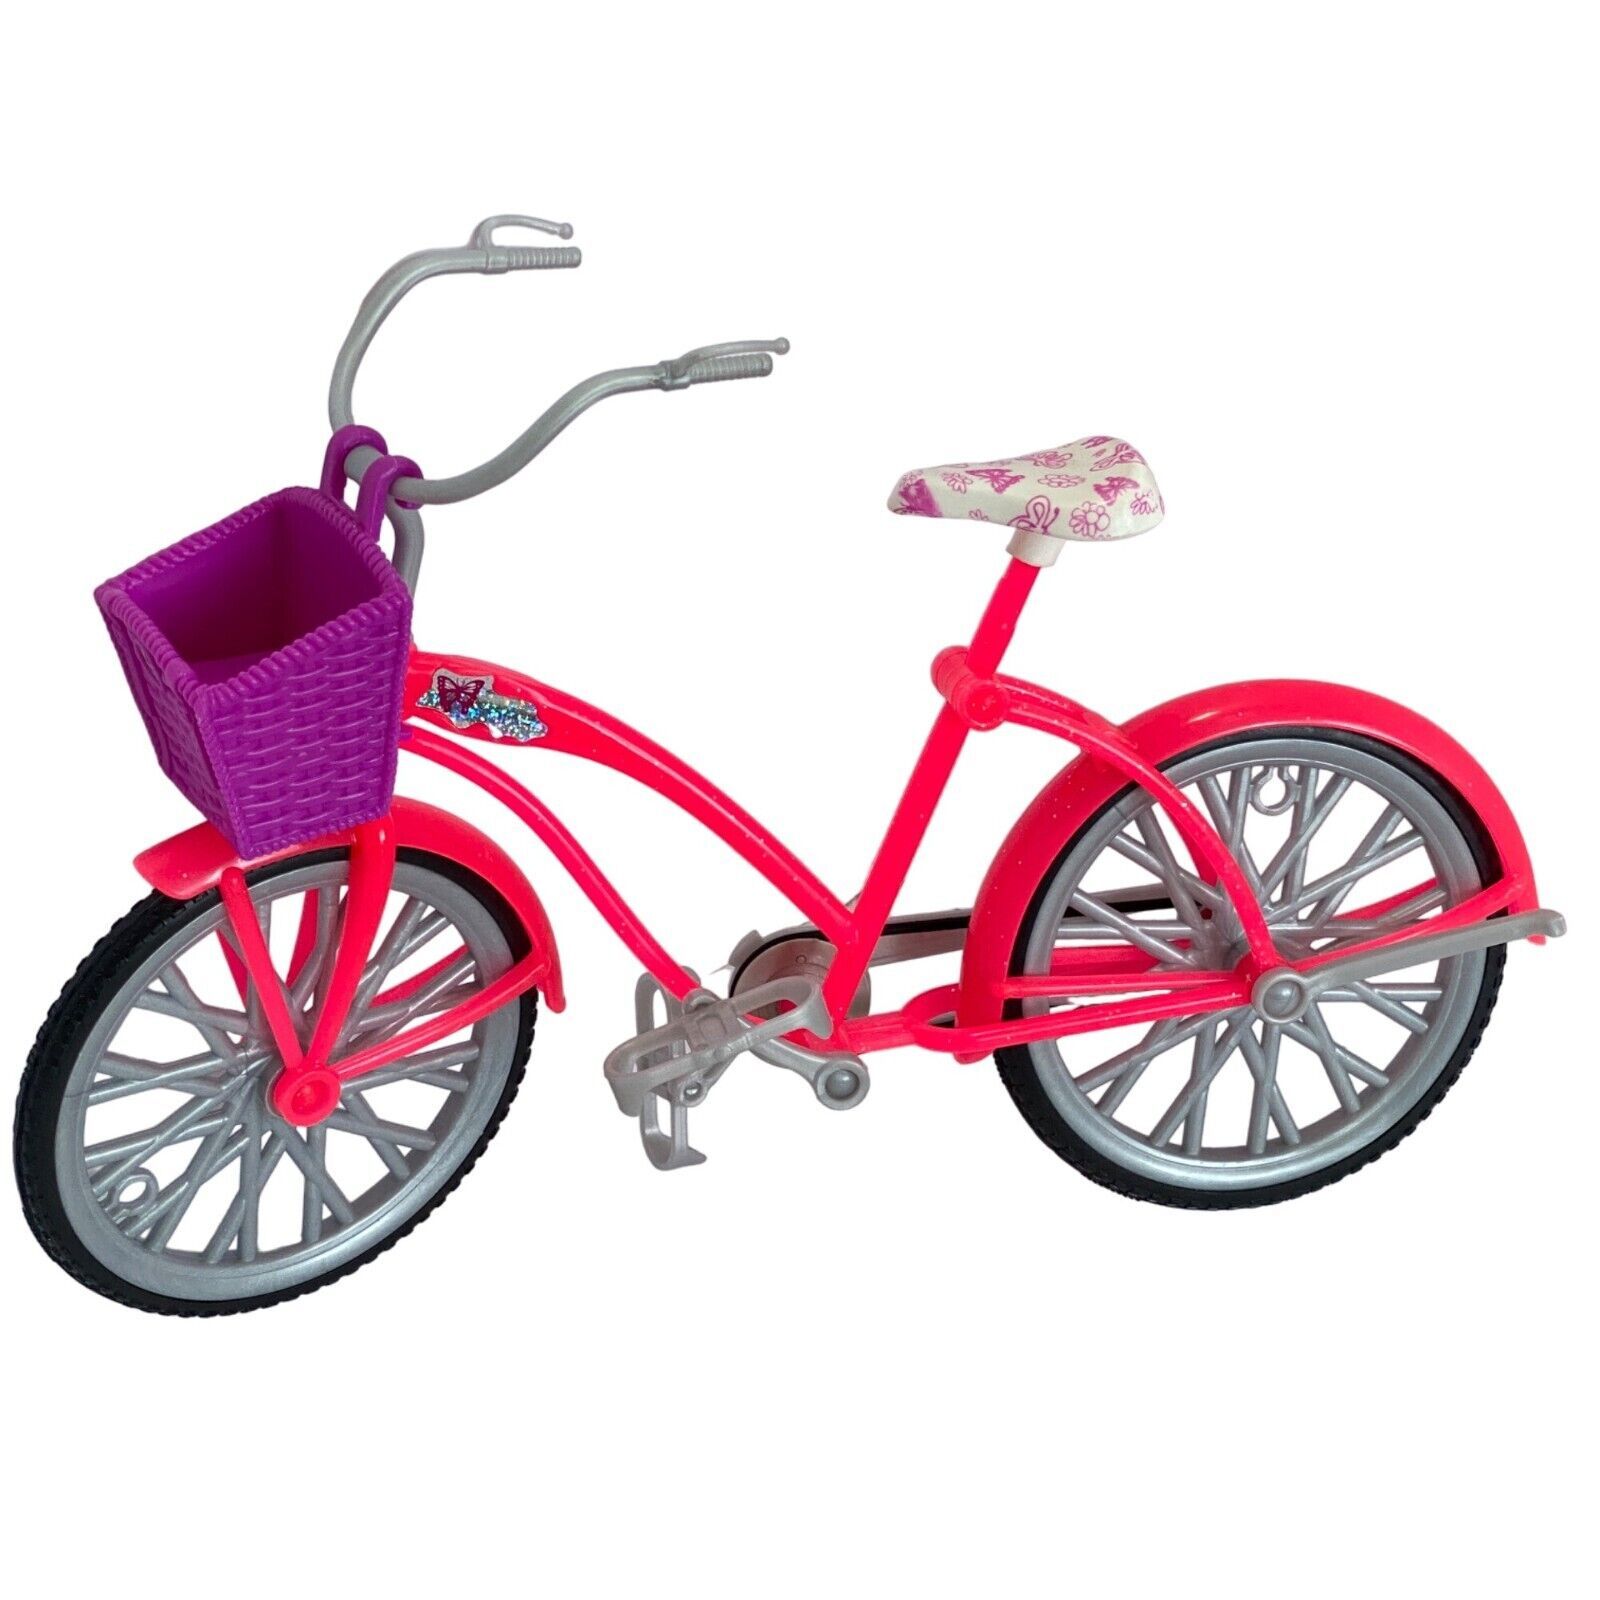 Pink Mattel Barbie Bike Beach Party Bicycle Accessory with Basket 7.5in x 11in - $12.95